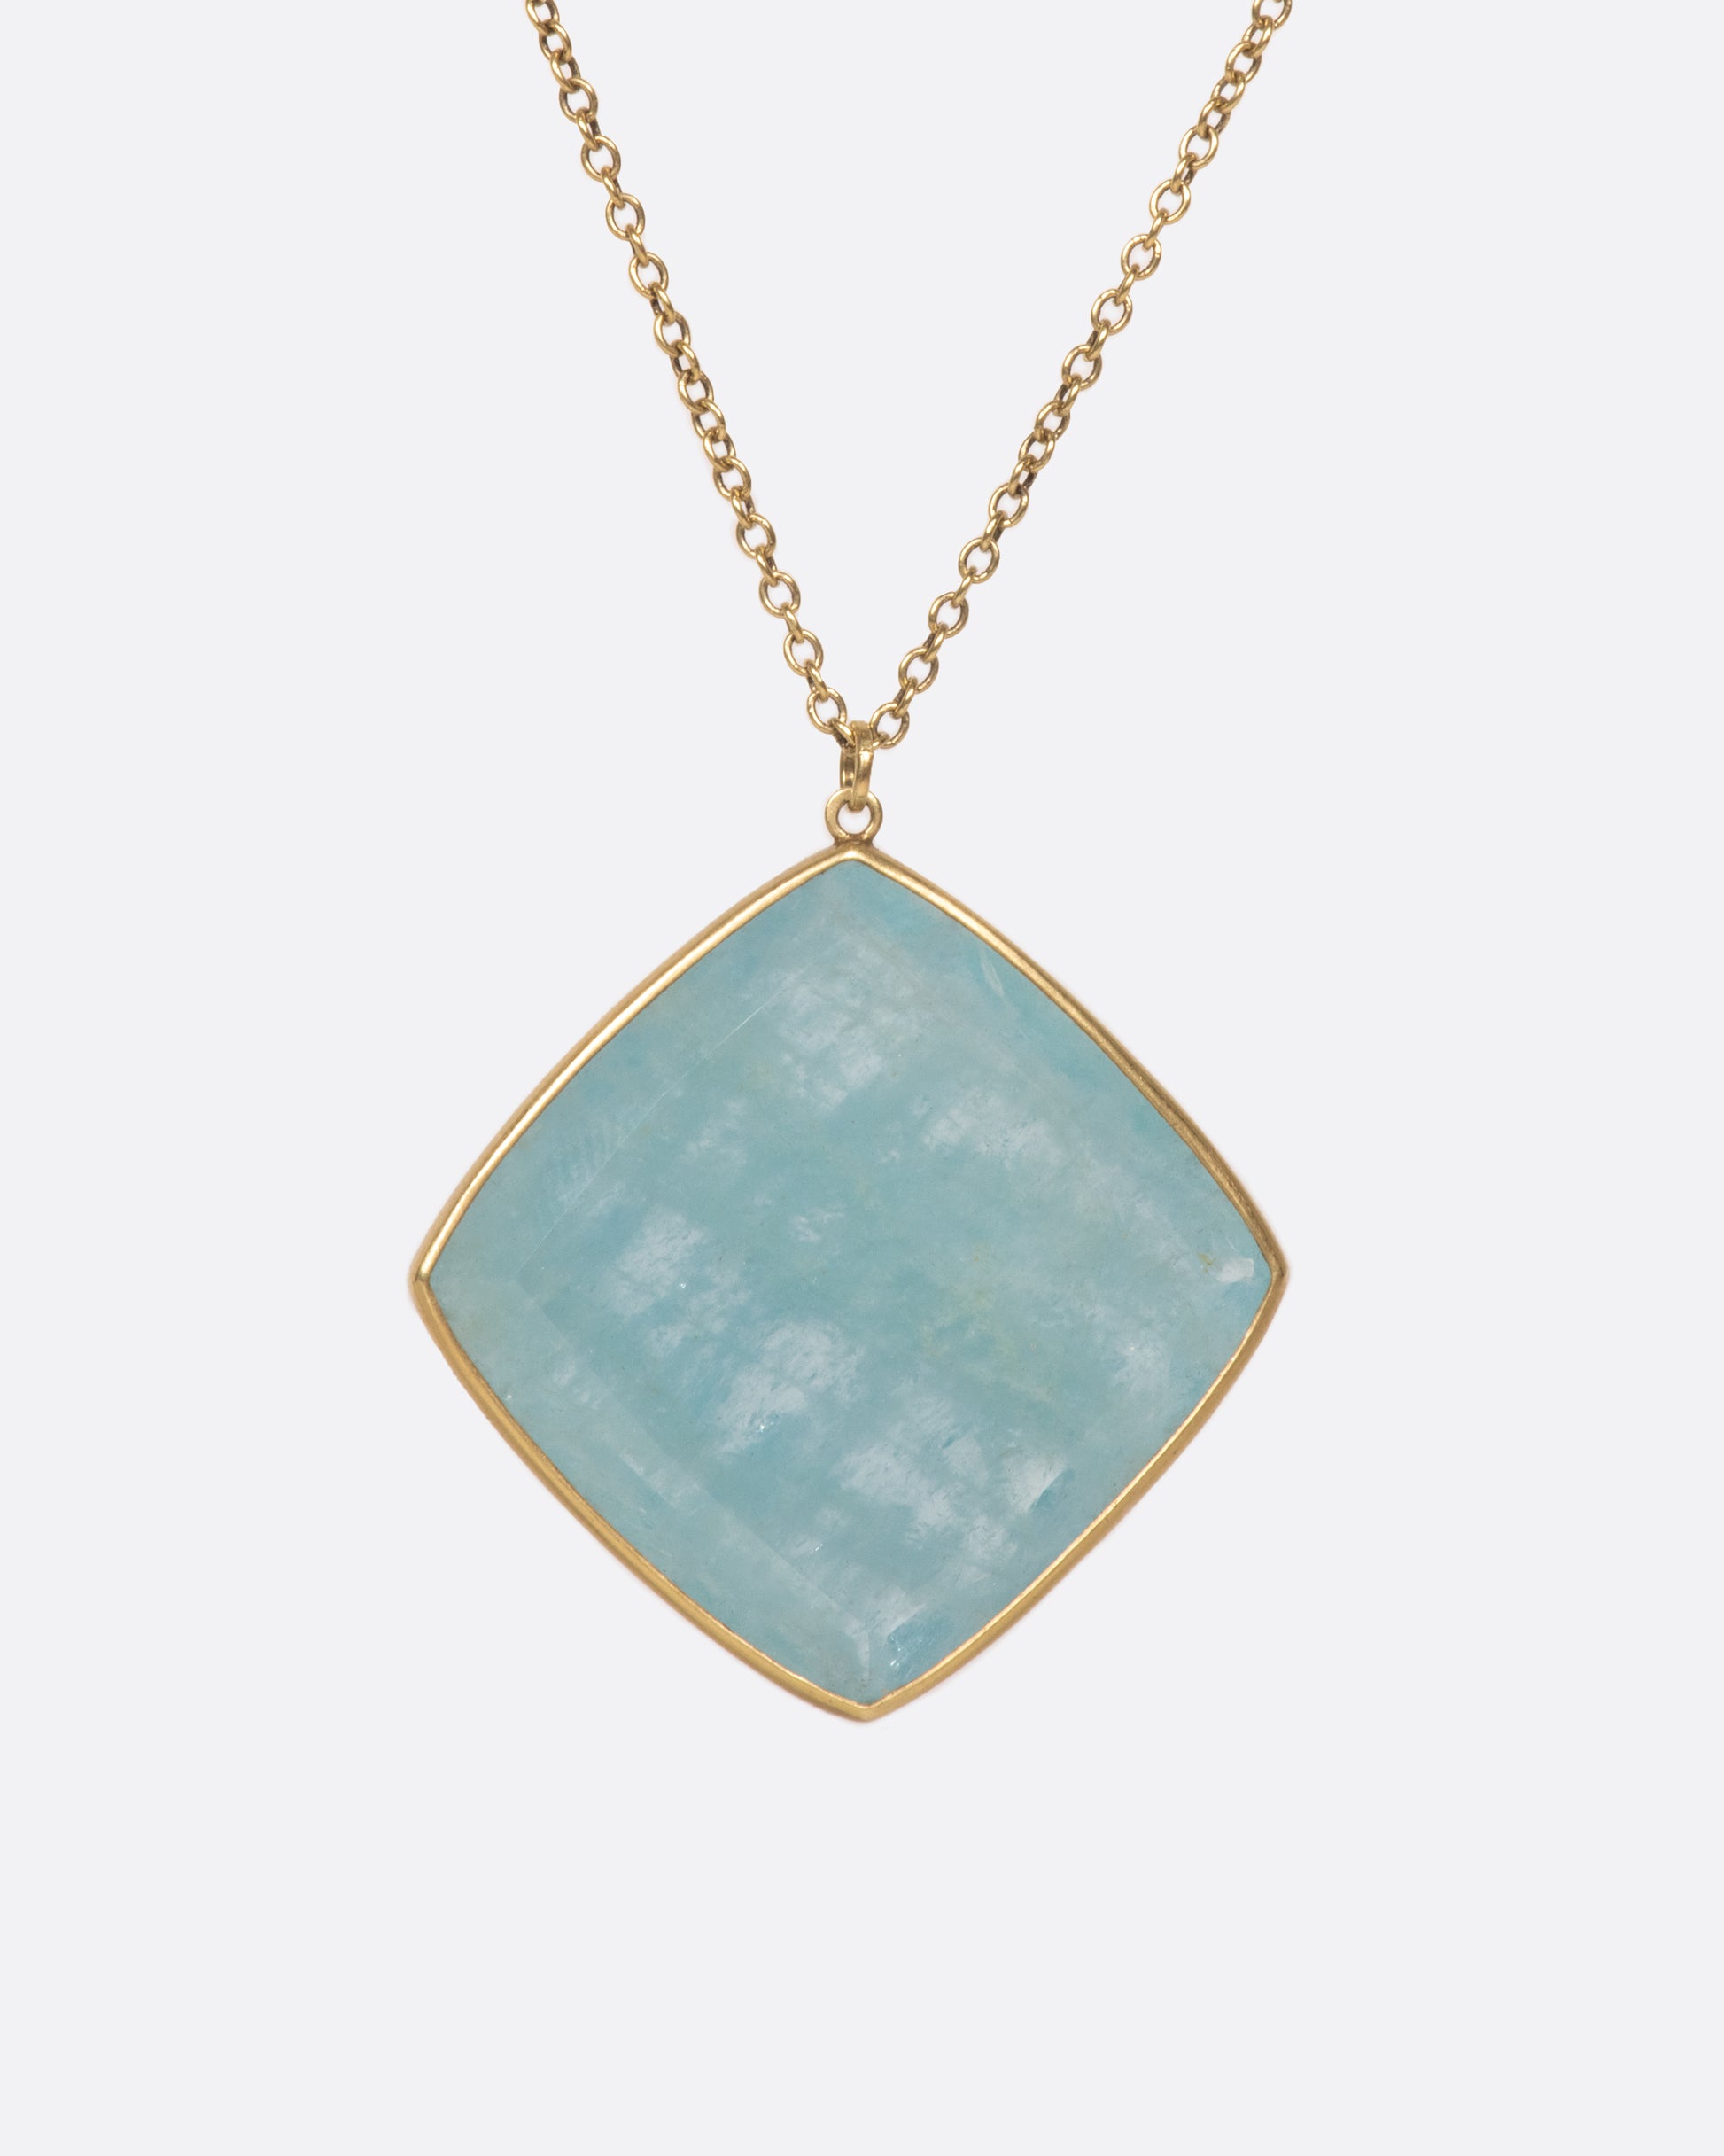 A large square aquamarine pendant hangings on a green gold chain, shown from the front.